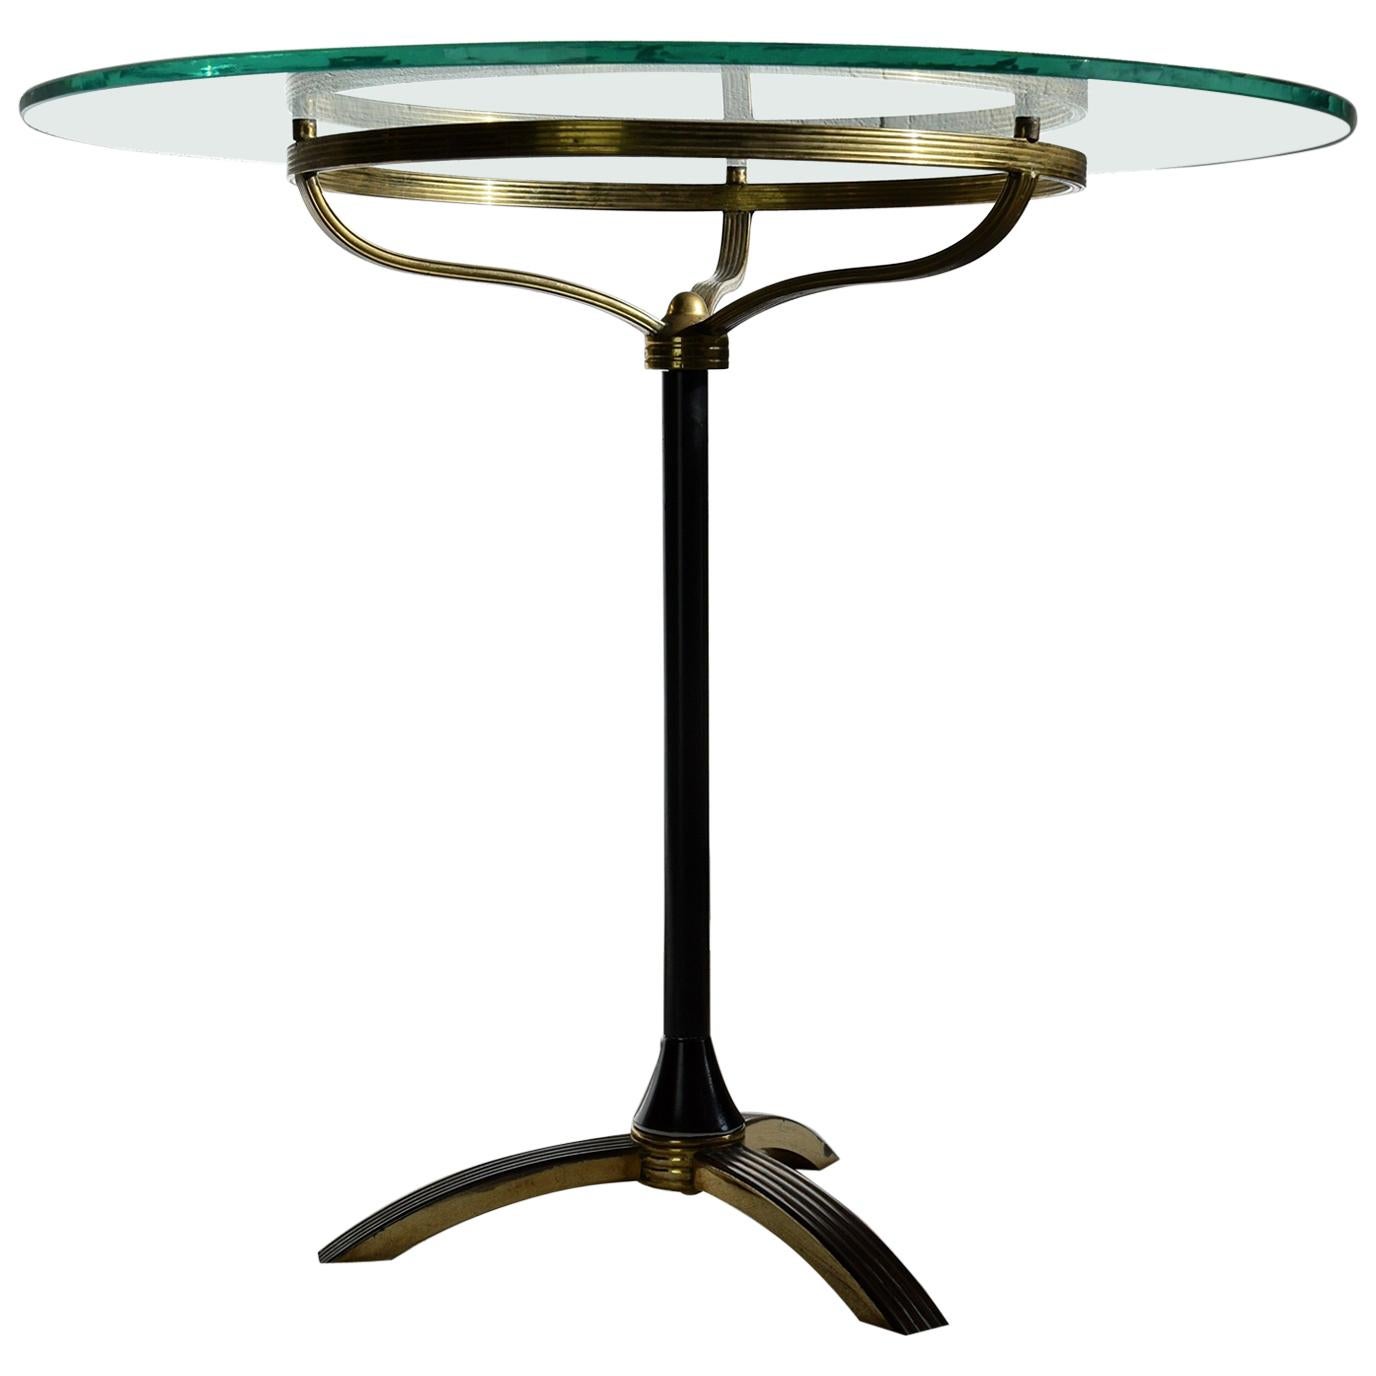 Italian Mid-century Modern Brass and Glass Side Table